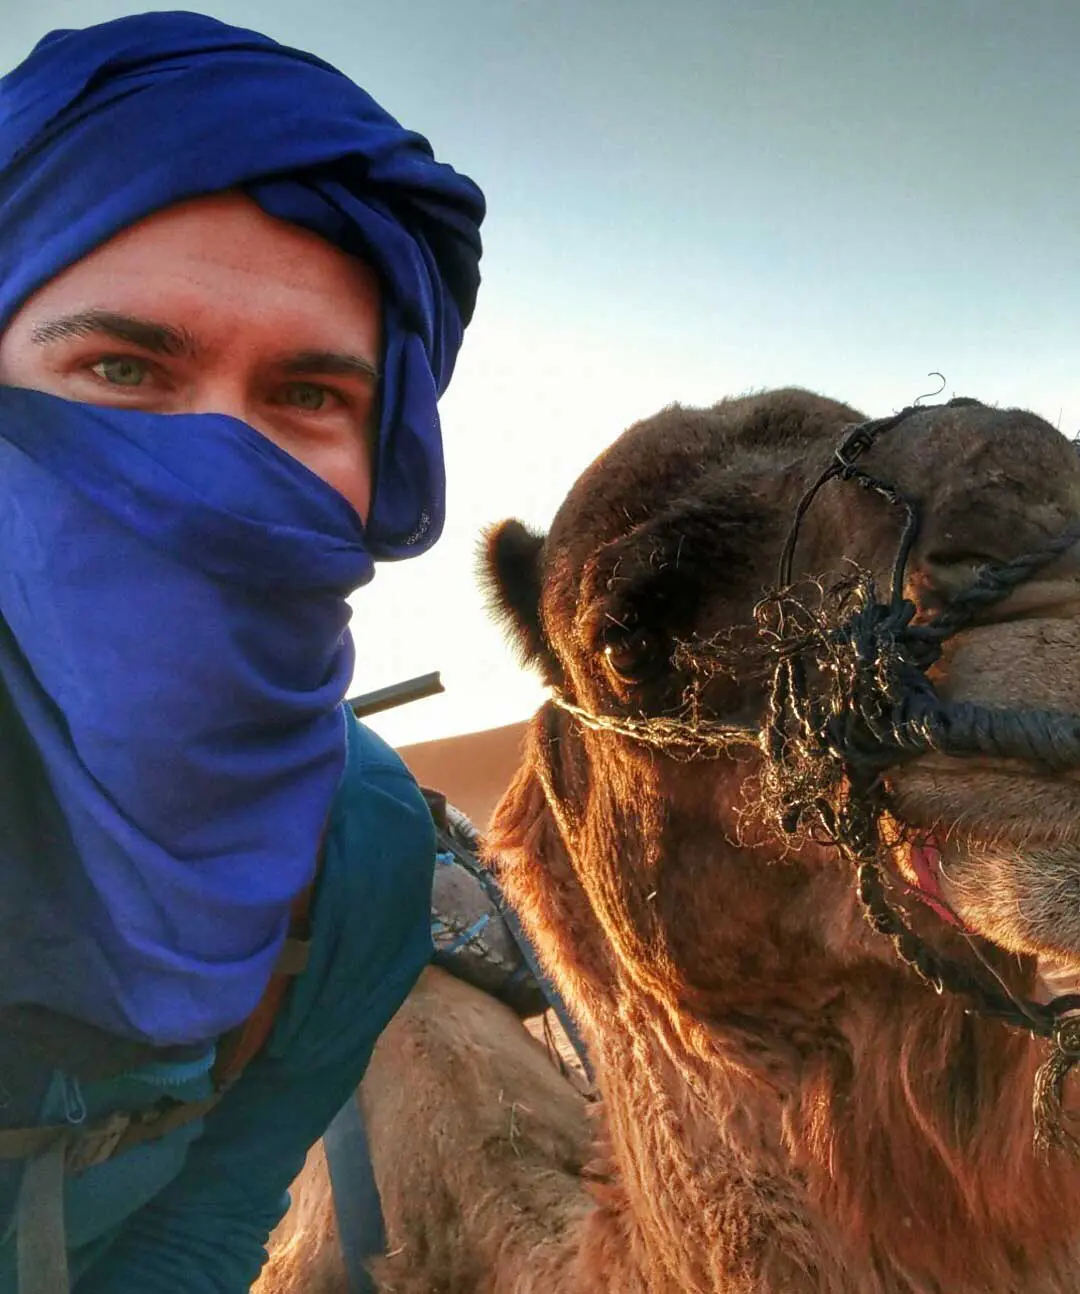 Bret McGowen taking a selfie with a camel